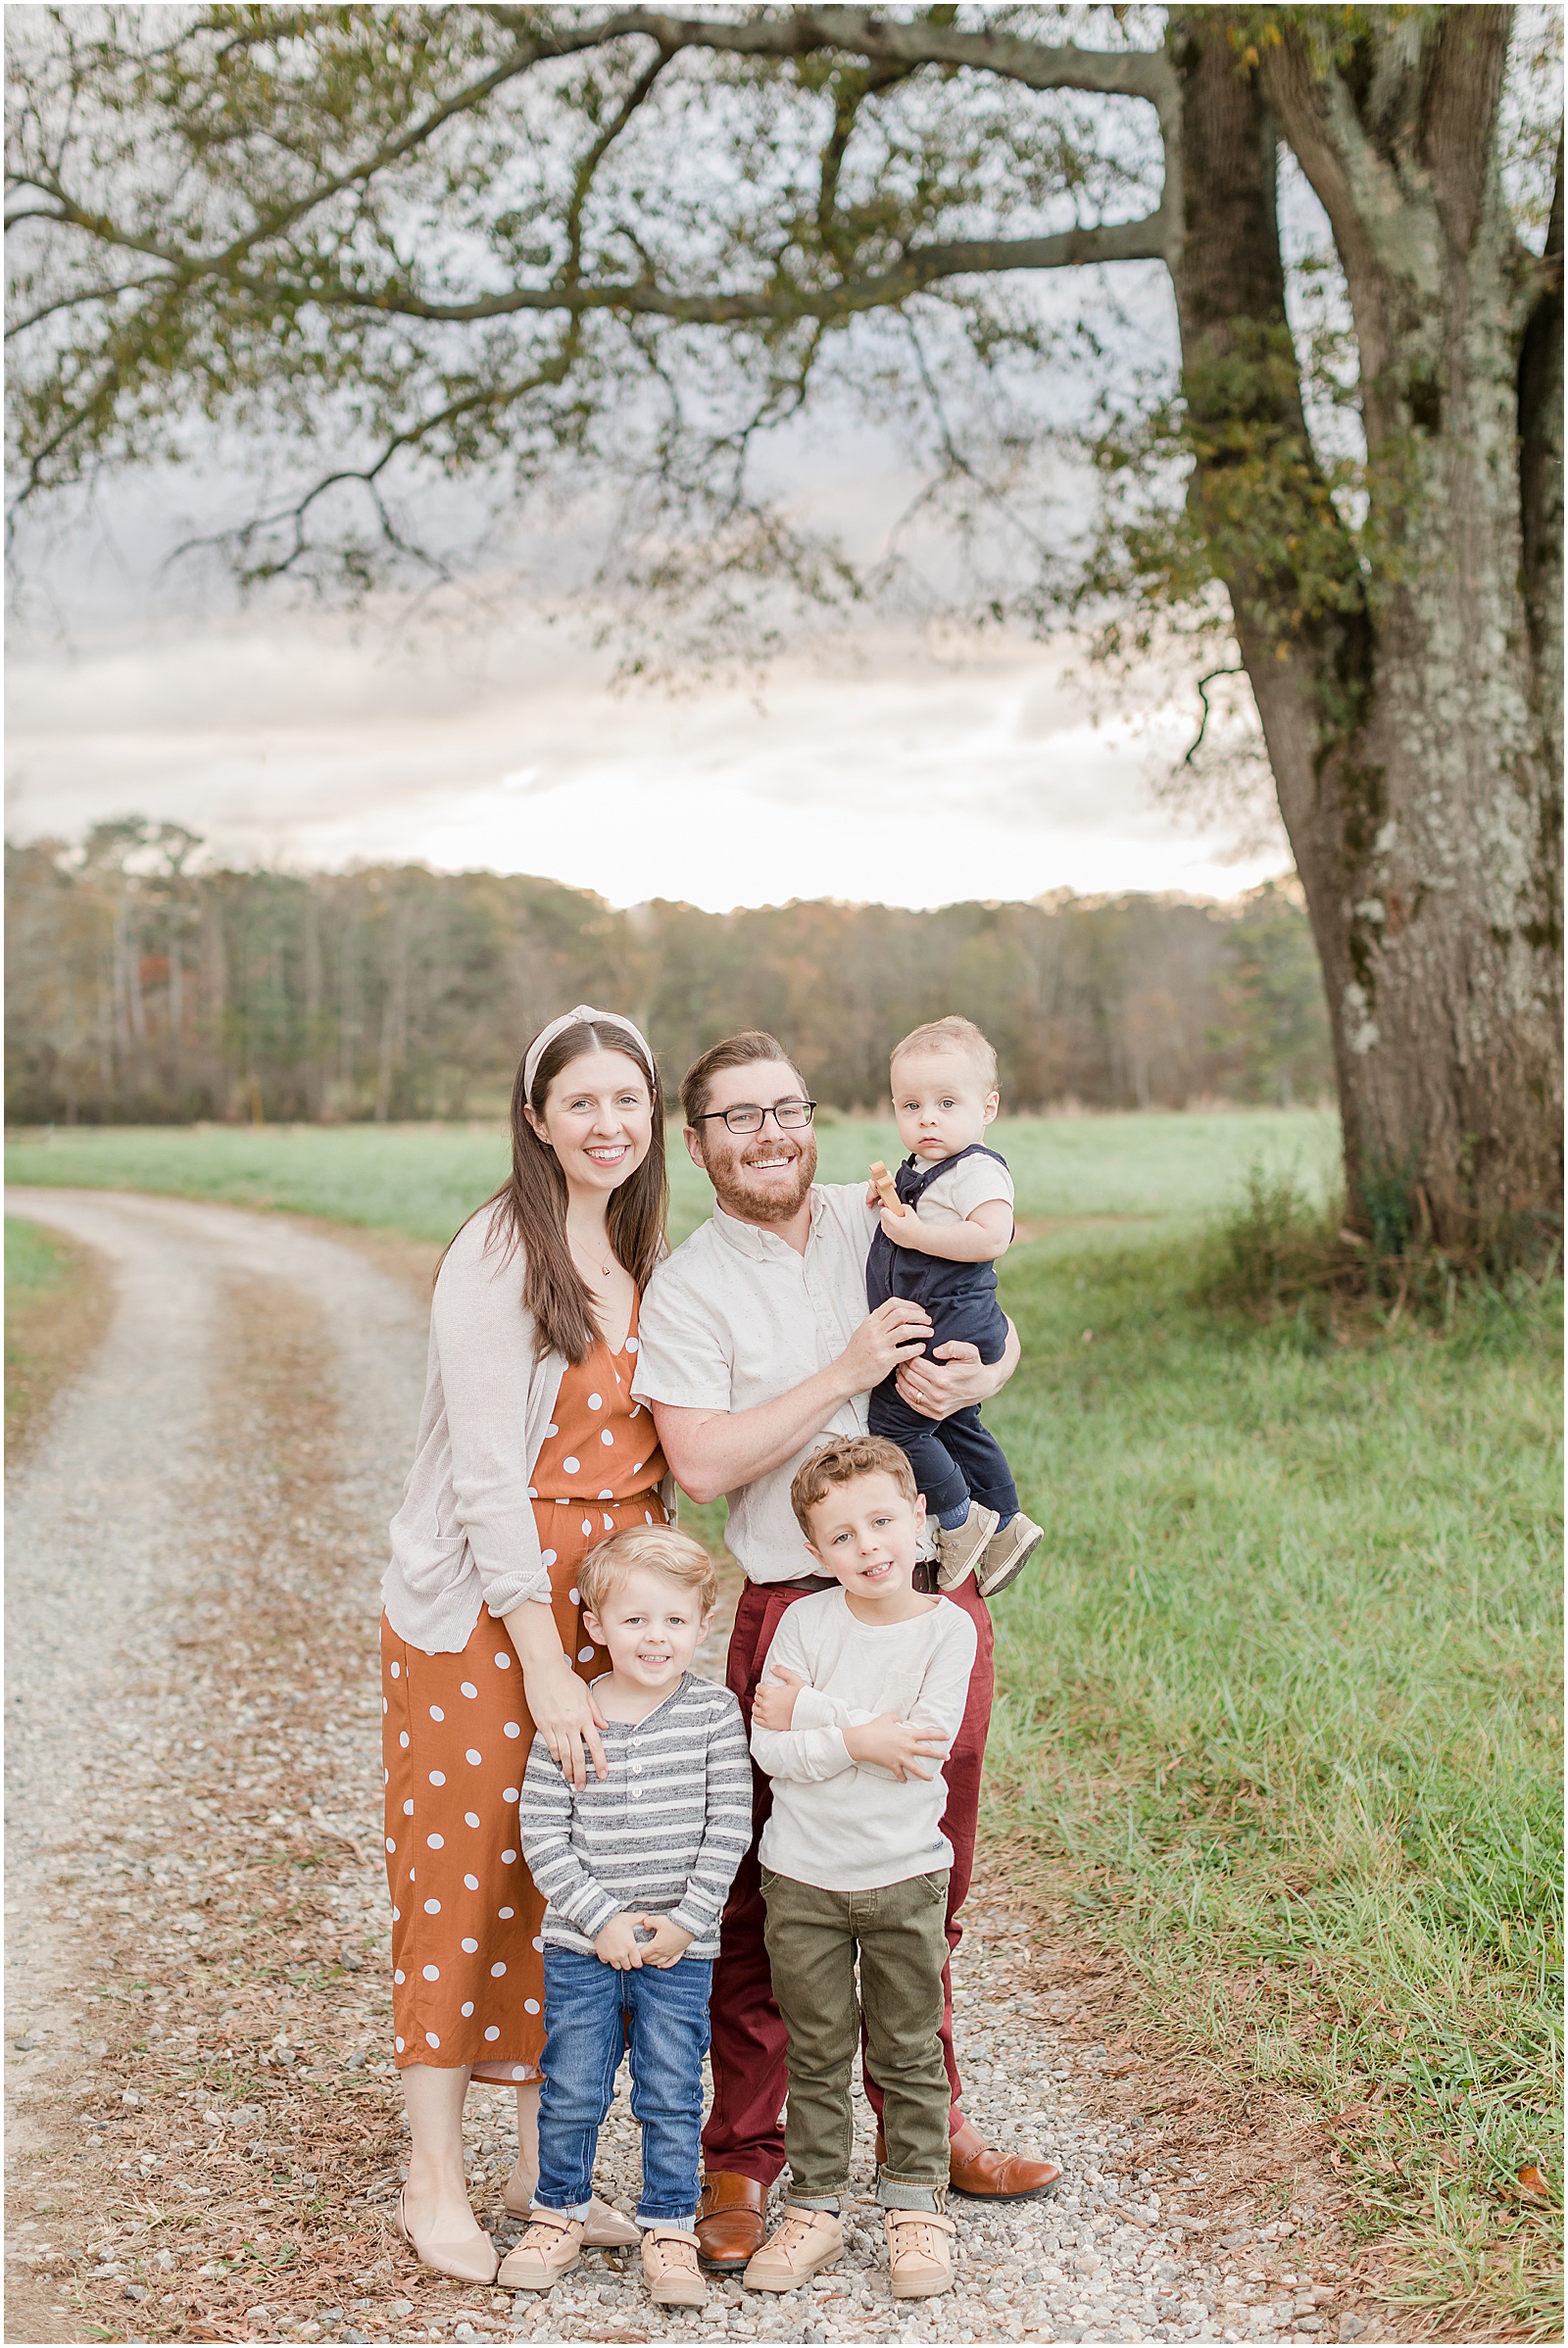 Cumming Family Photography, natural family photos, fall family photos, North Georgia photographer, North Atlanta Photographer, Cumming Georgia Photographer